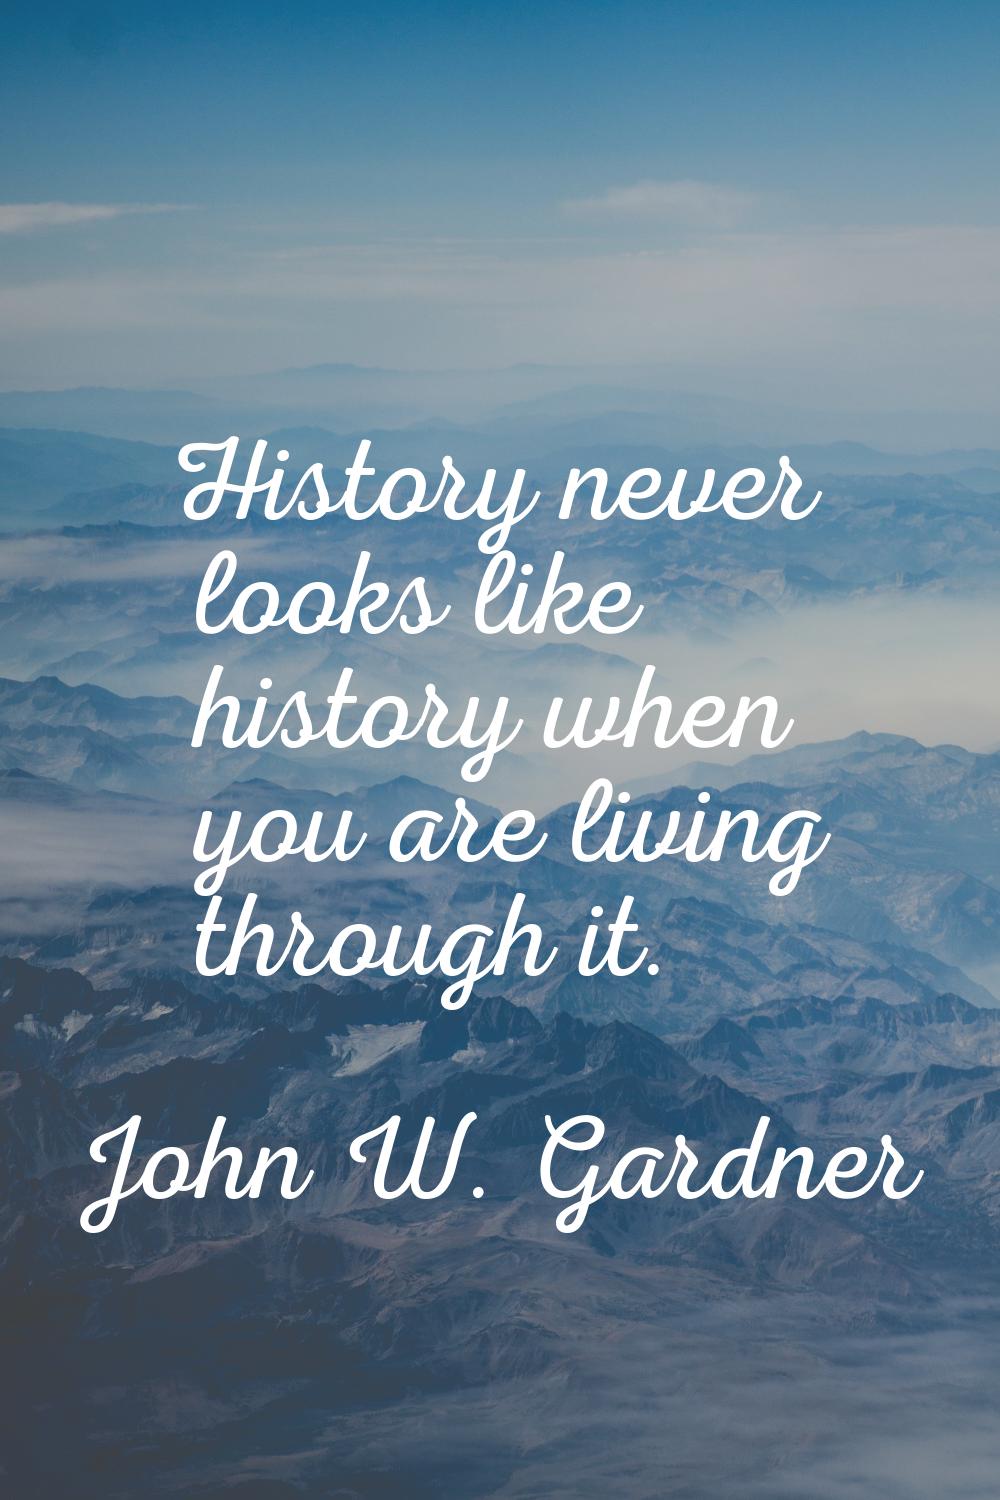 History never looks like history when you are living through it.